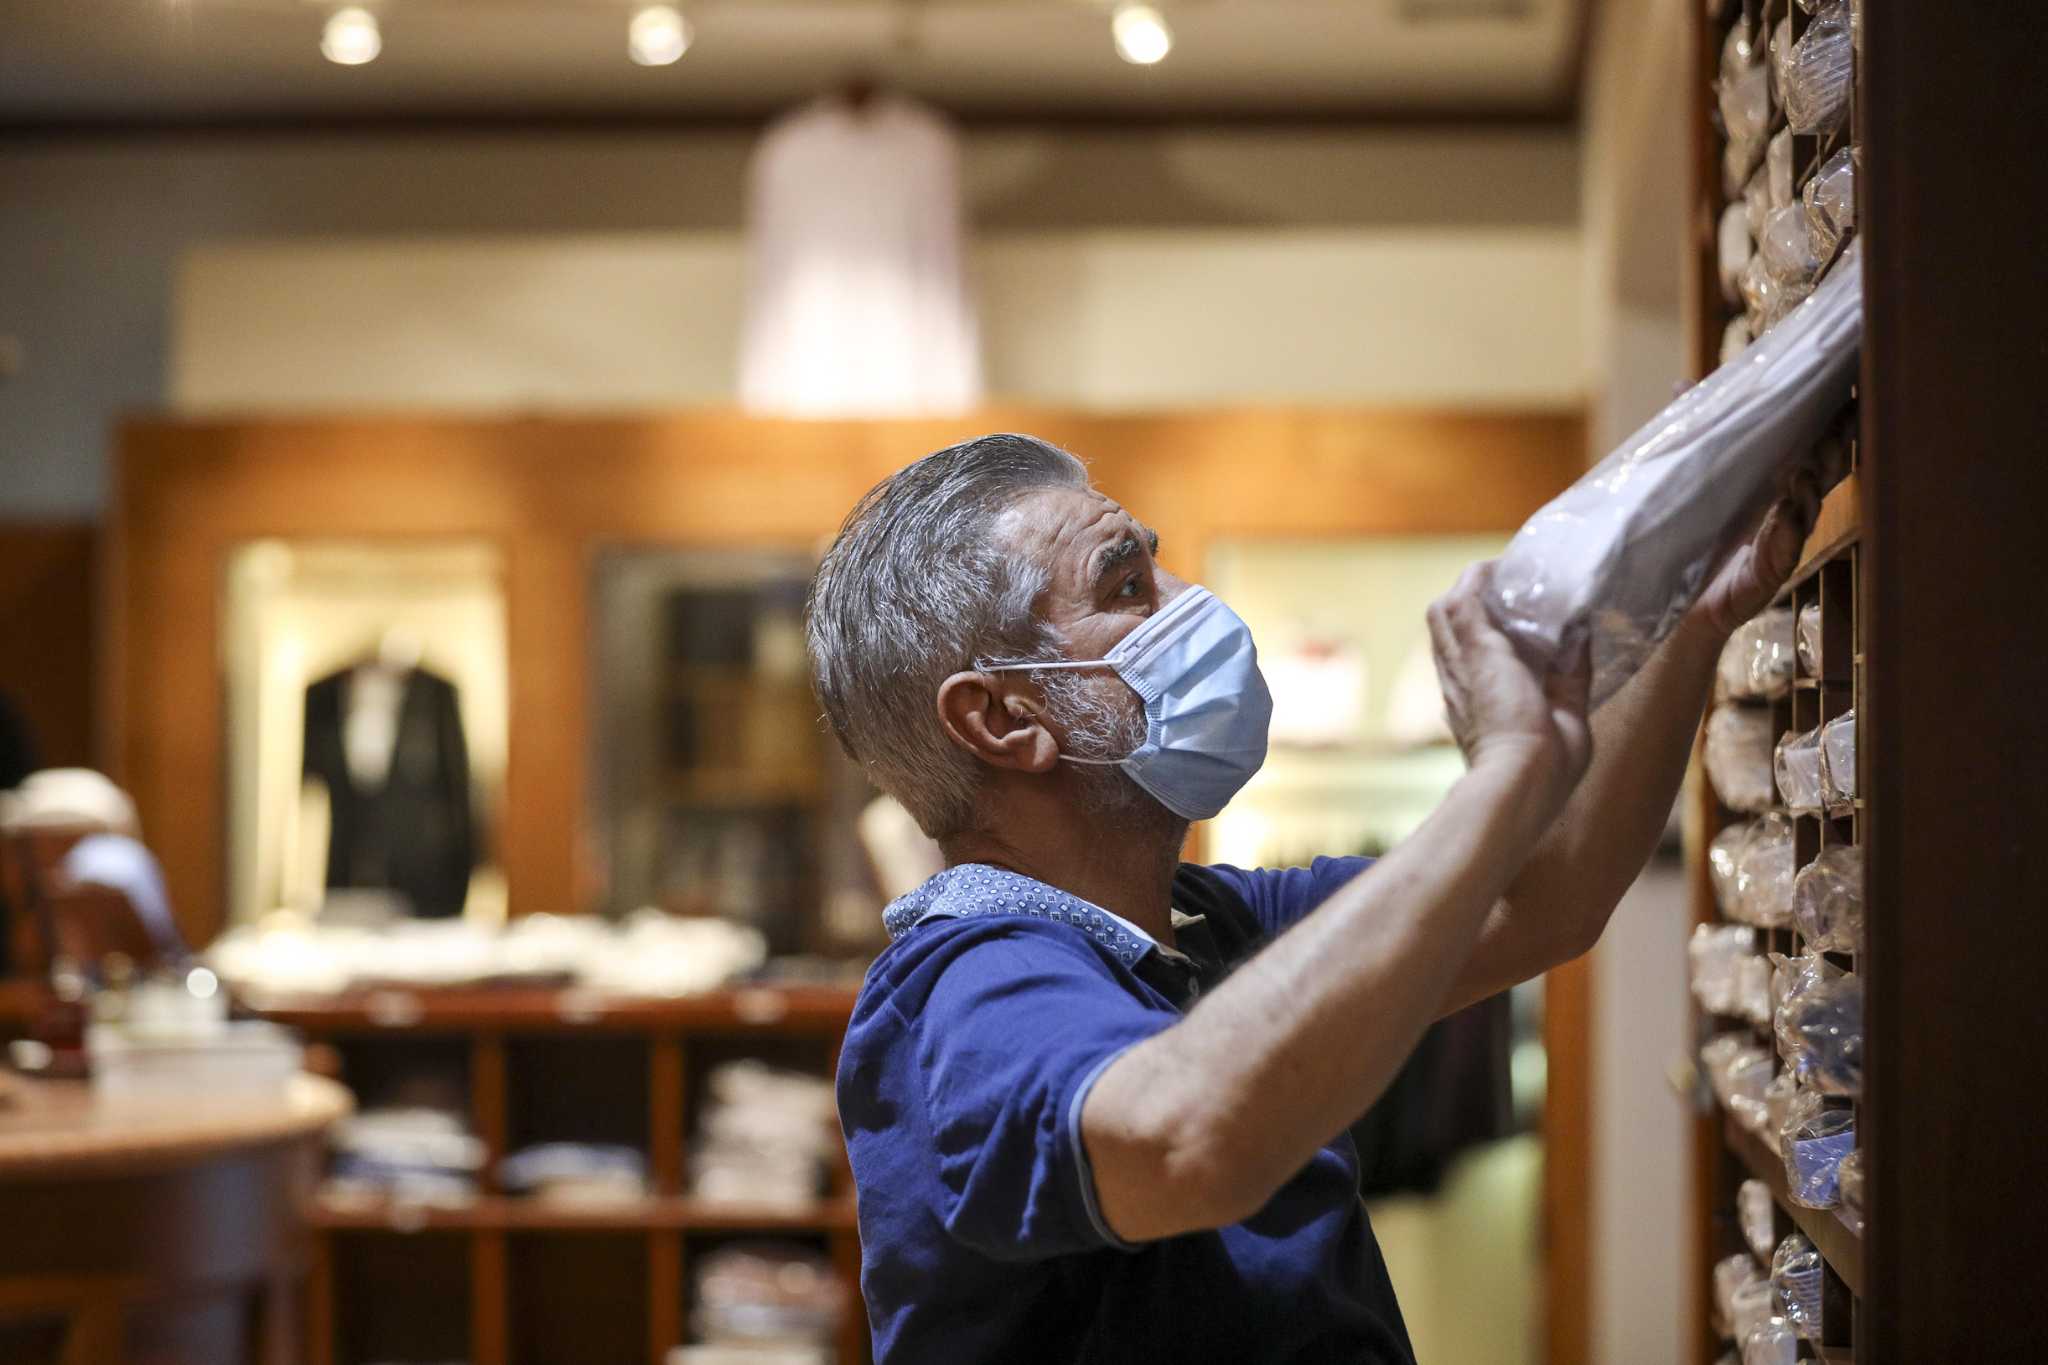 Galleria, Premium Outlets, Memorial City, Katy Mills malls to temporarily  close during pandemic